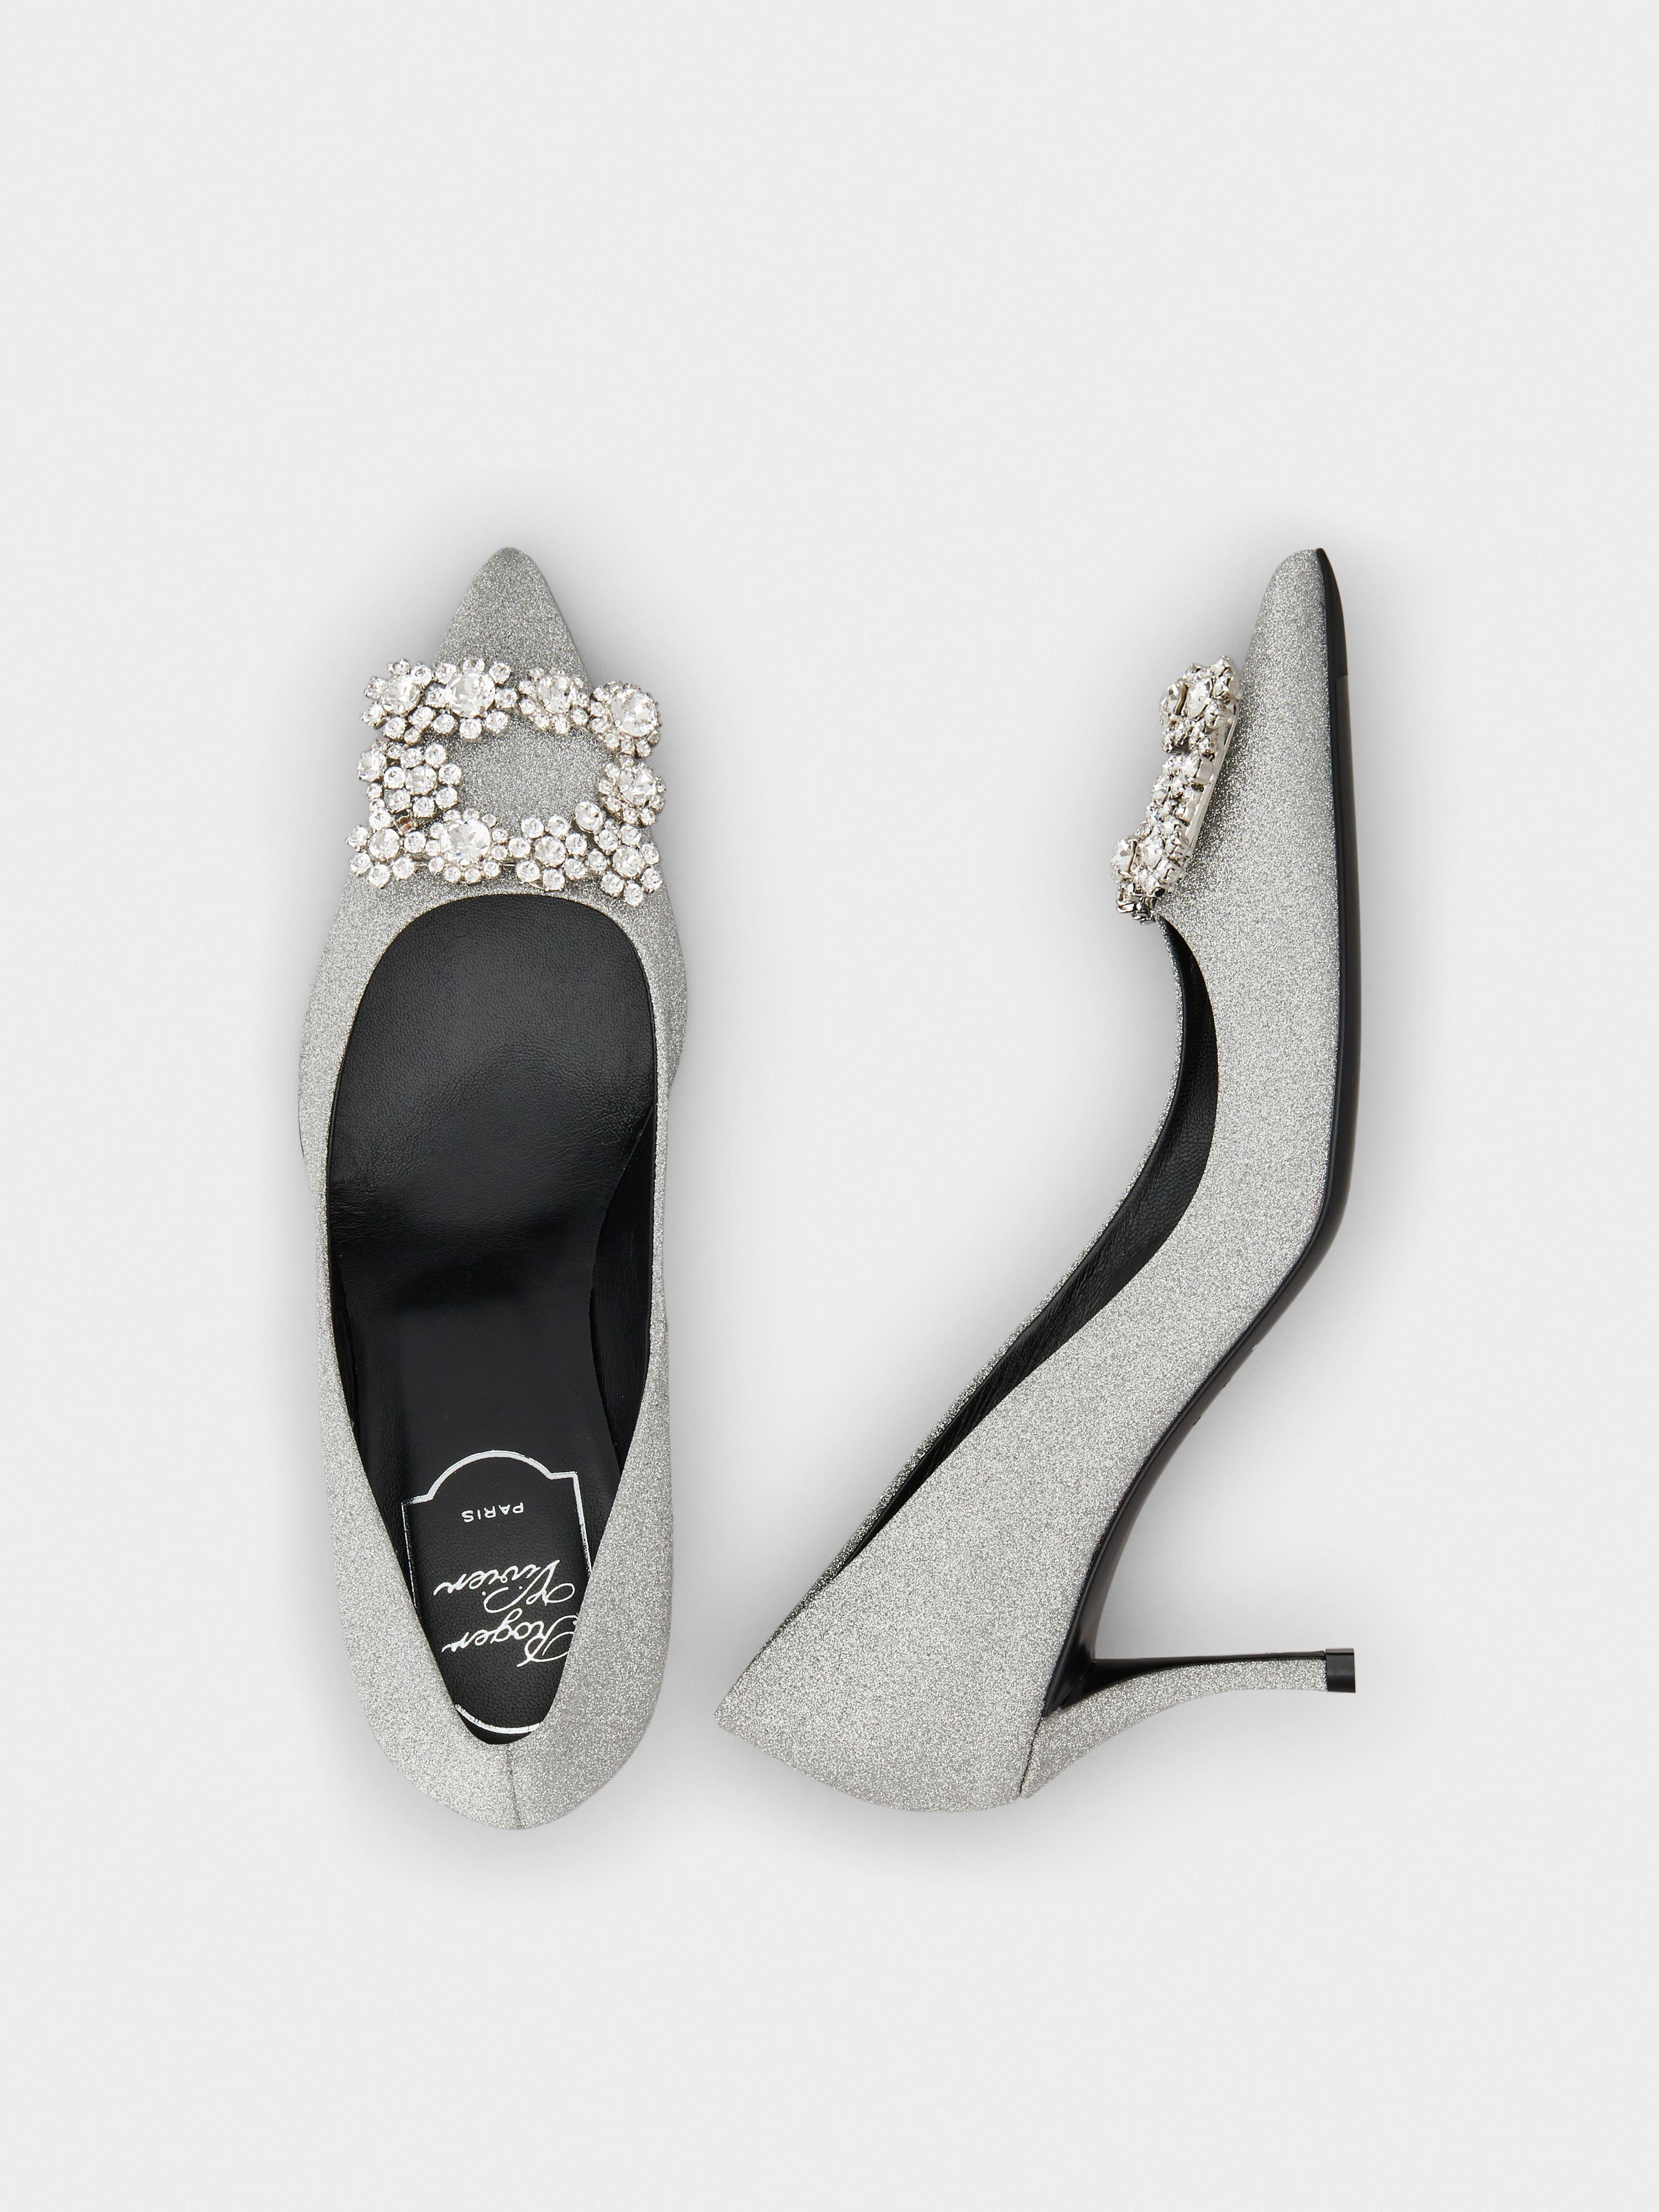 Roger Vivier Shoes in Silver (Metallic) - Lyst